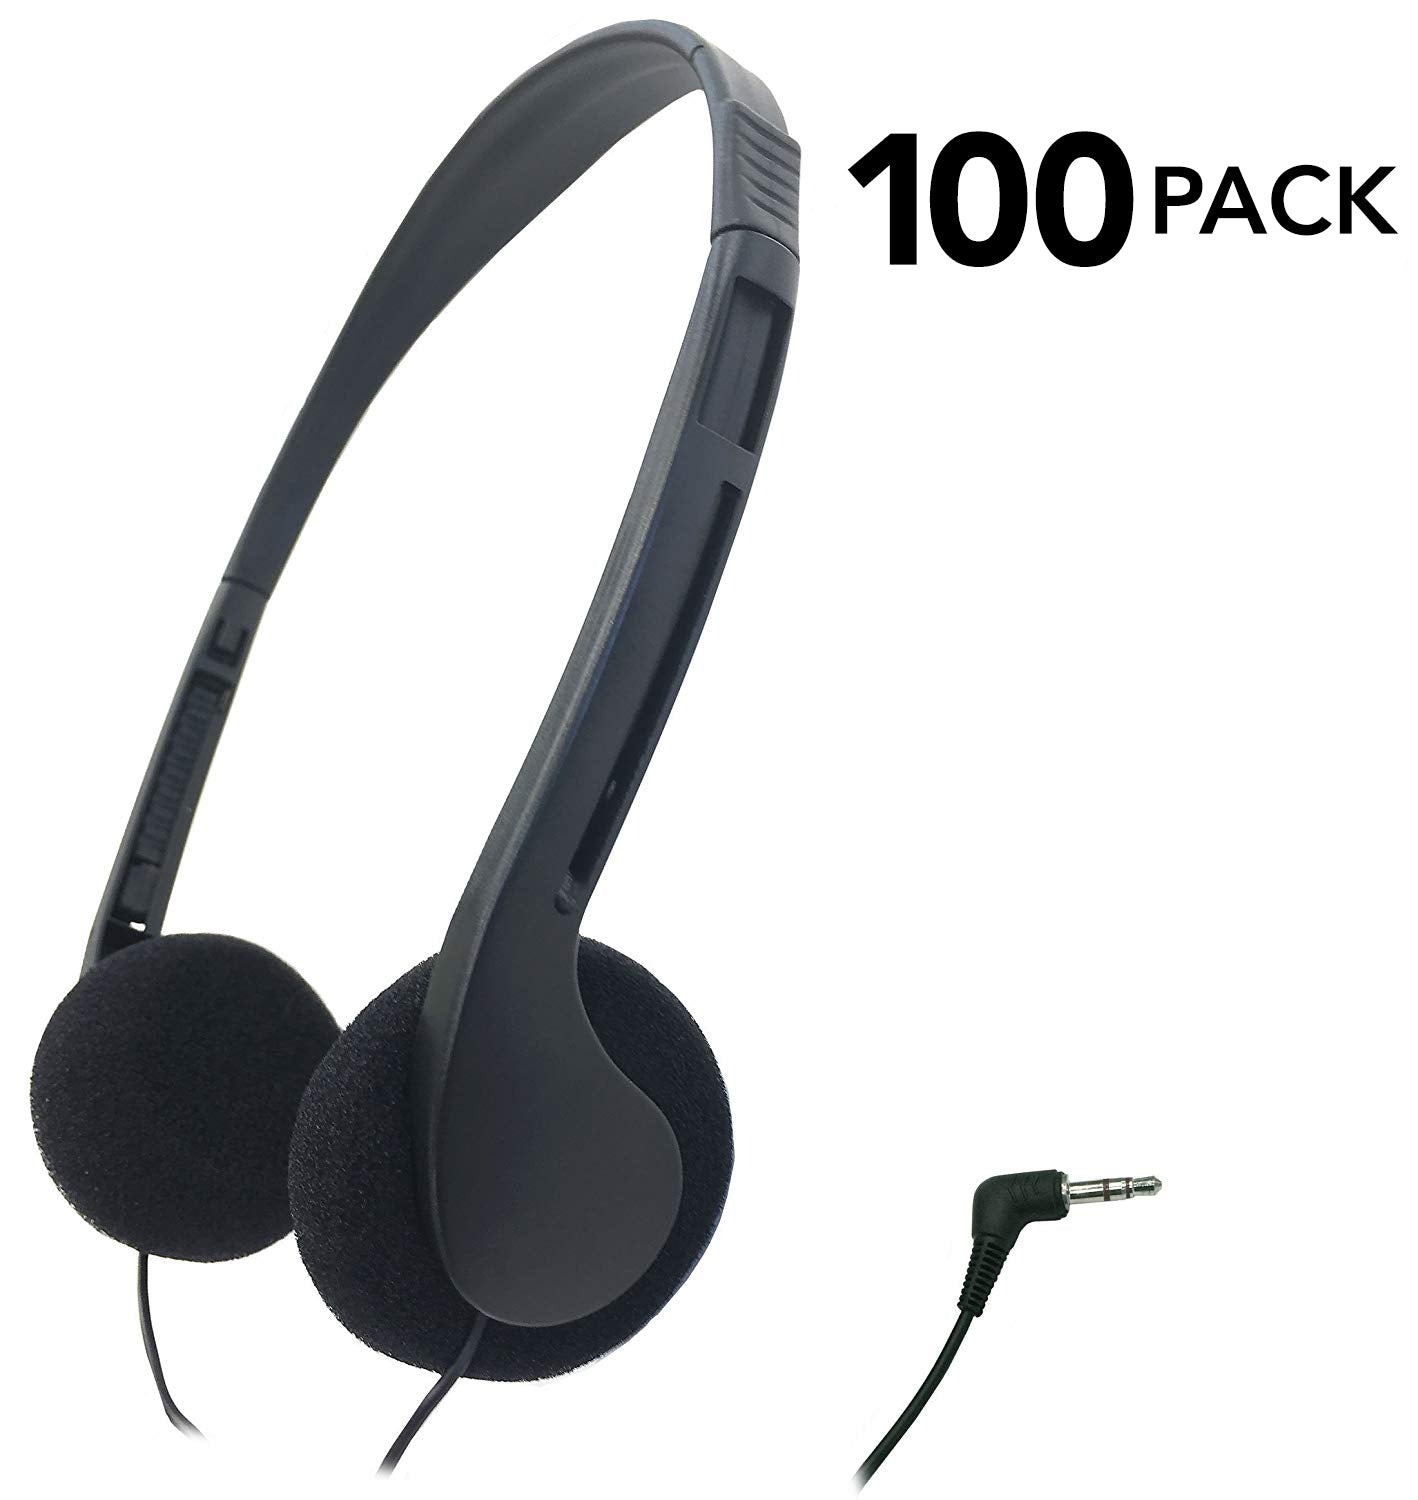 Bulk Pack of 100 SmithOutlet Low-Cost Headphones for Classroom and Library Use